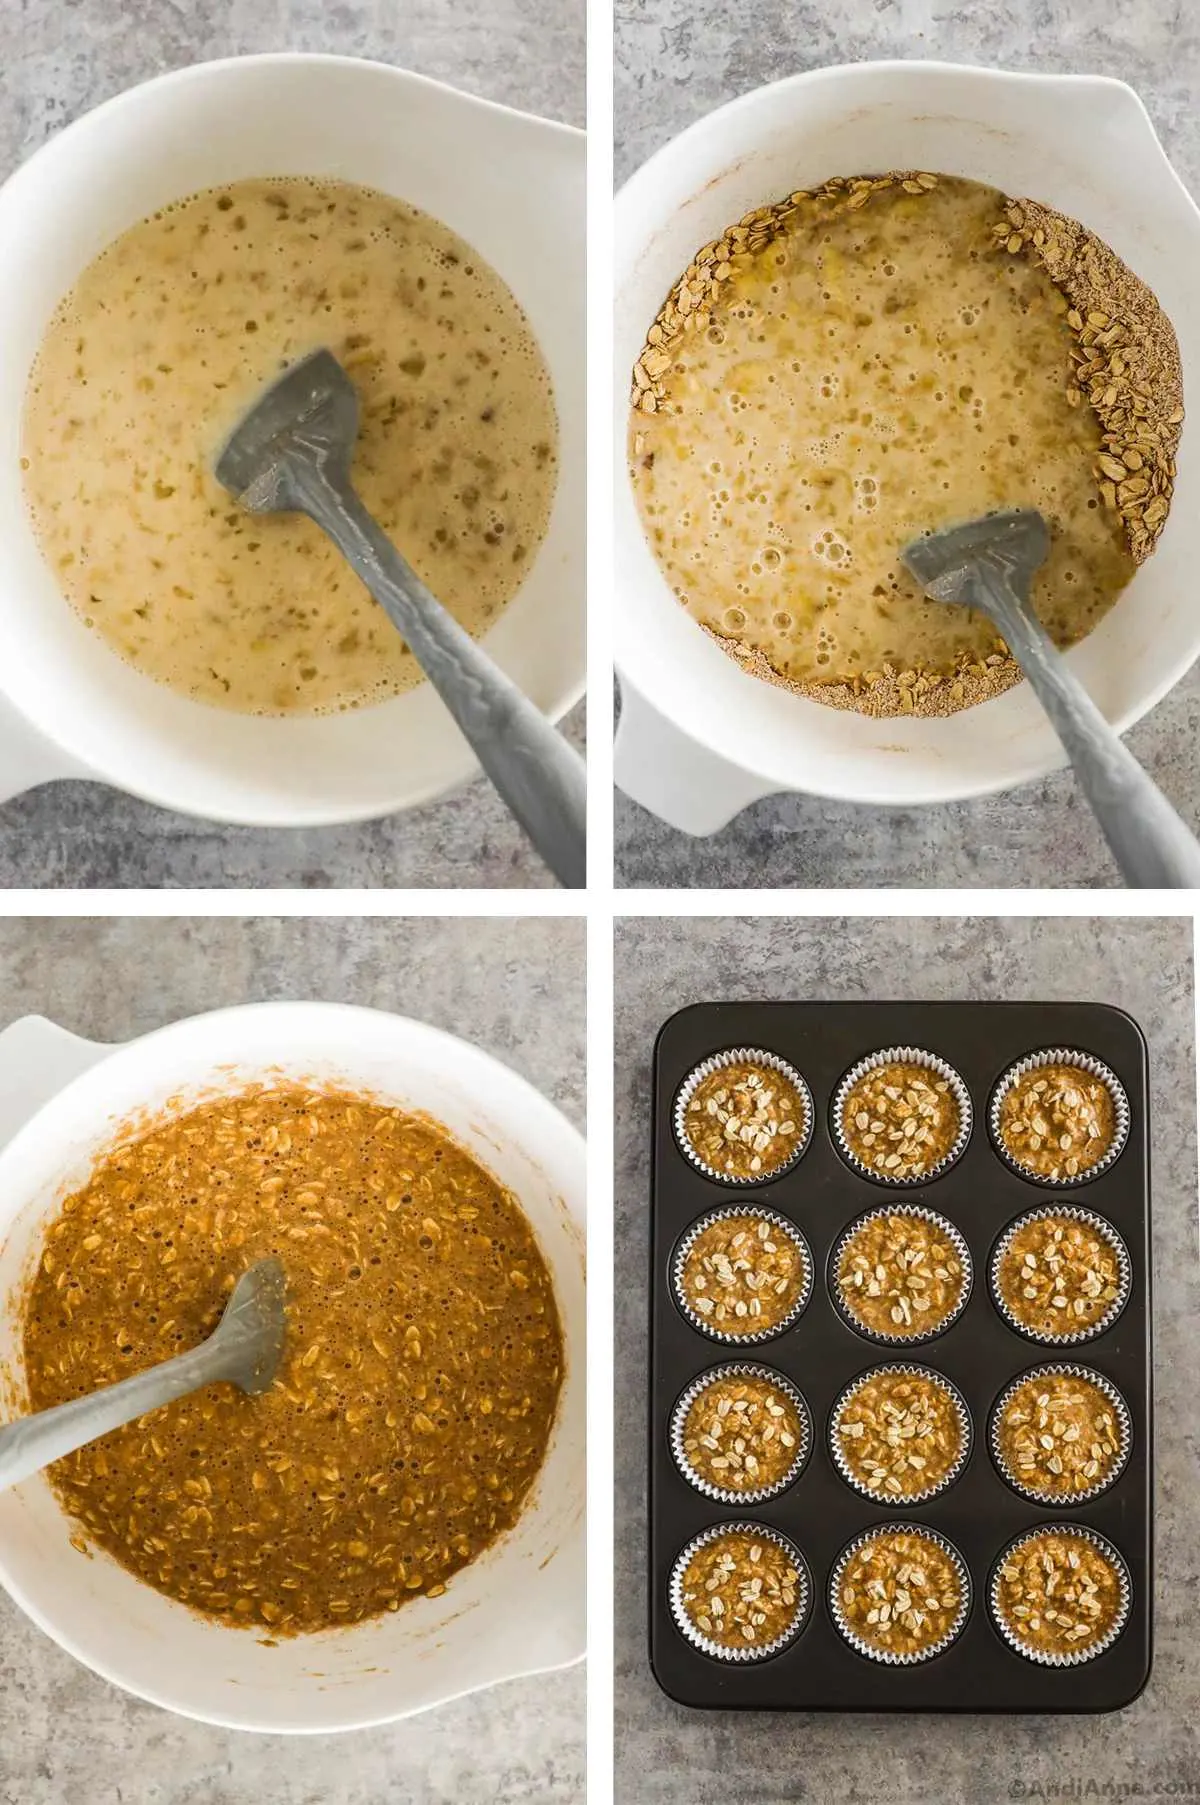 Four images in one. 1. All wet ingredients are combined in a bowl. 2. dry ingredients are added to the wet. 3. Wet and dry ingredients are mixed. 4. Mixed ingredients are added to a muffin baking tray of 12. 